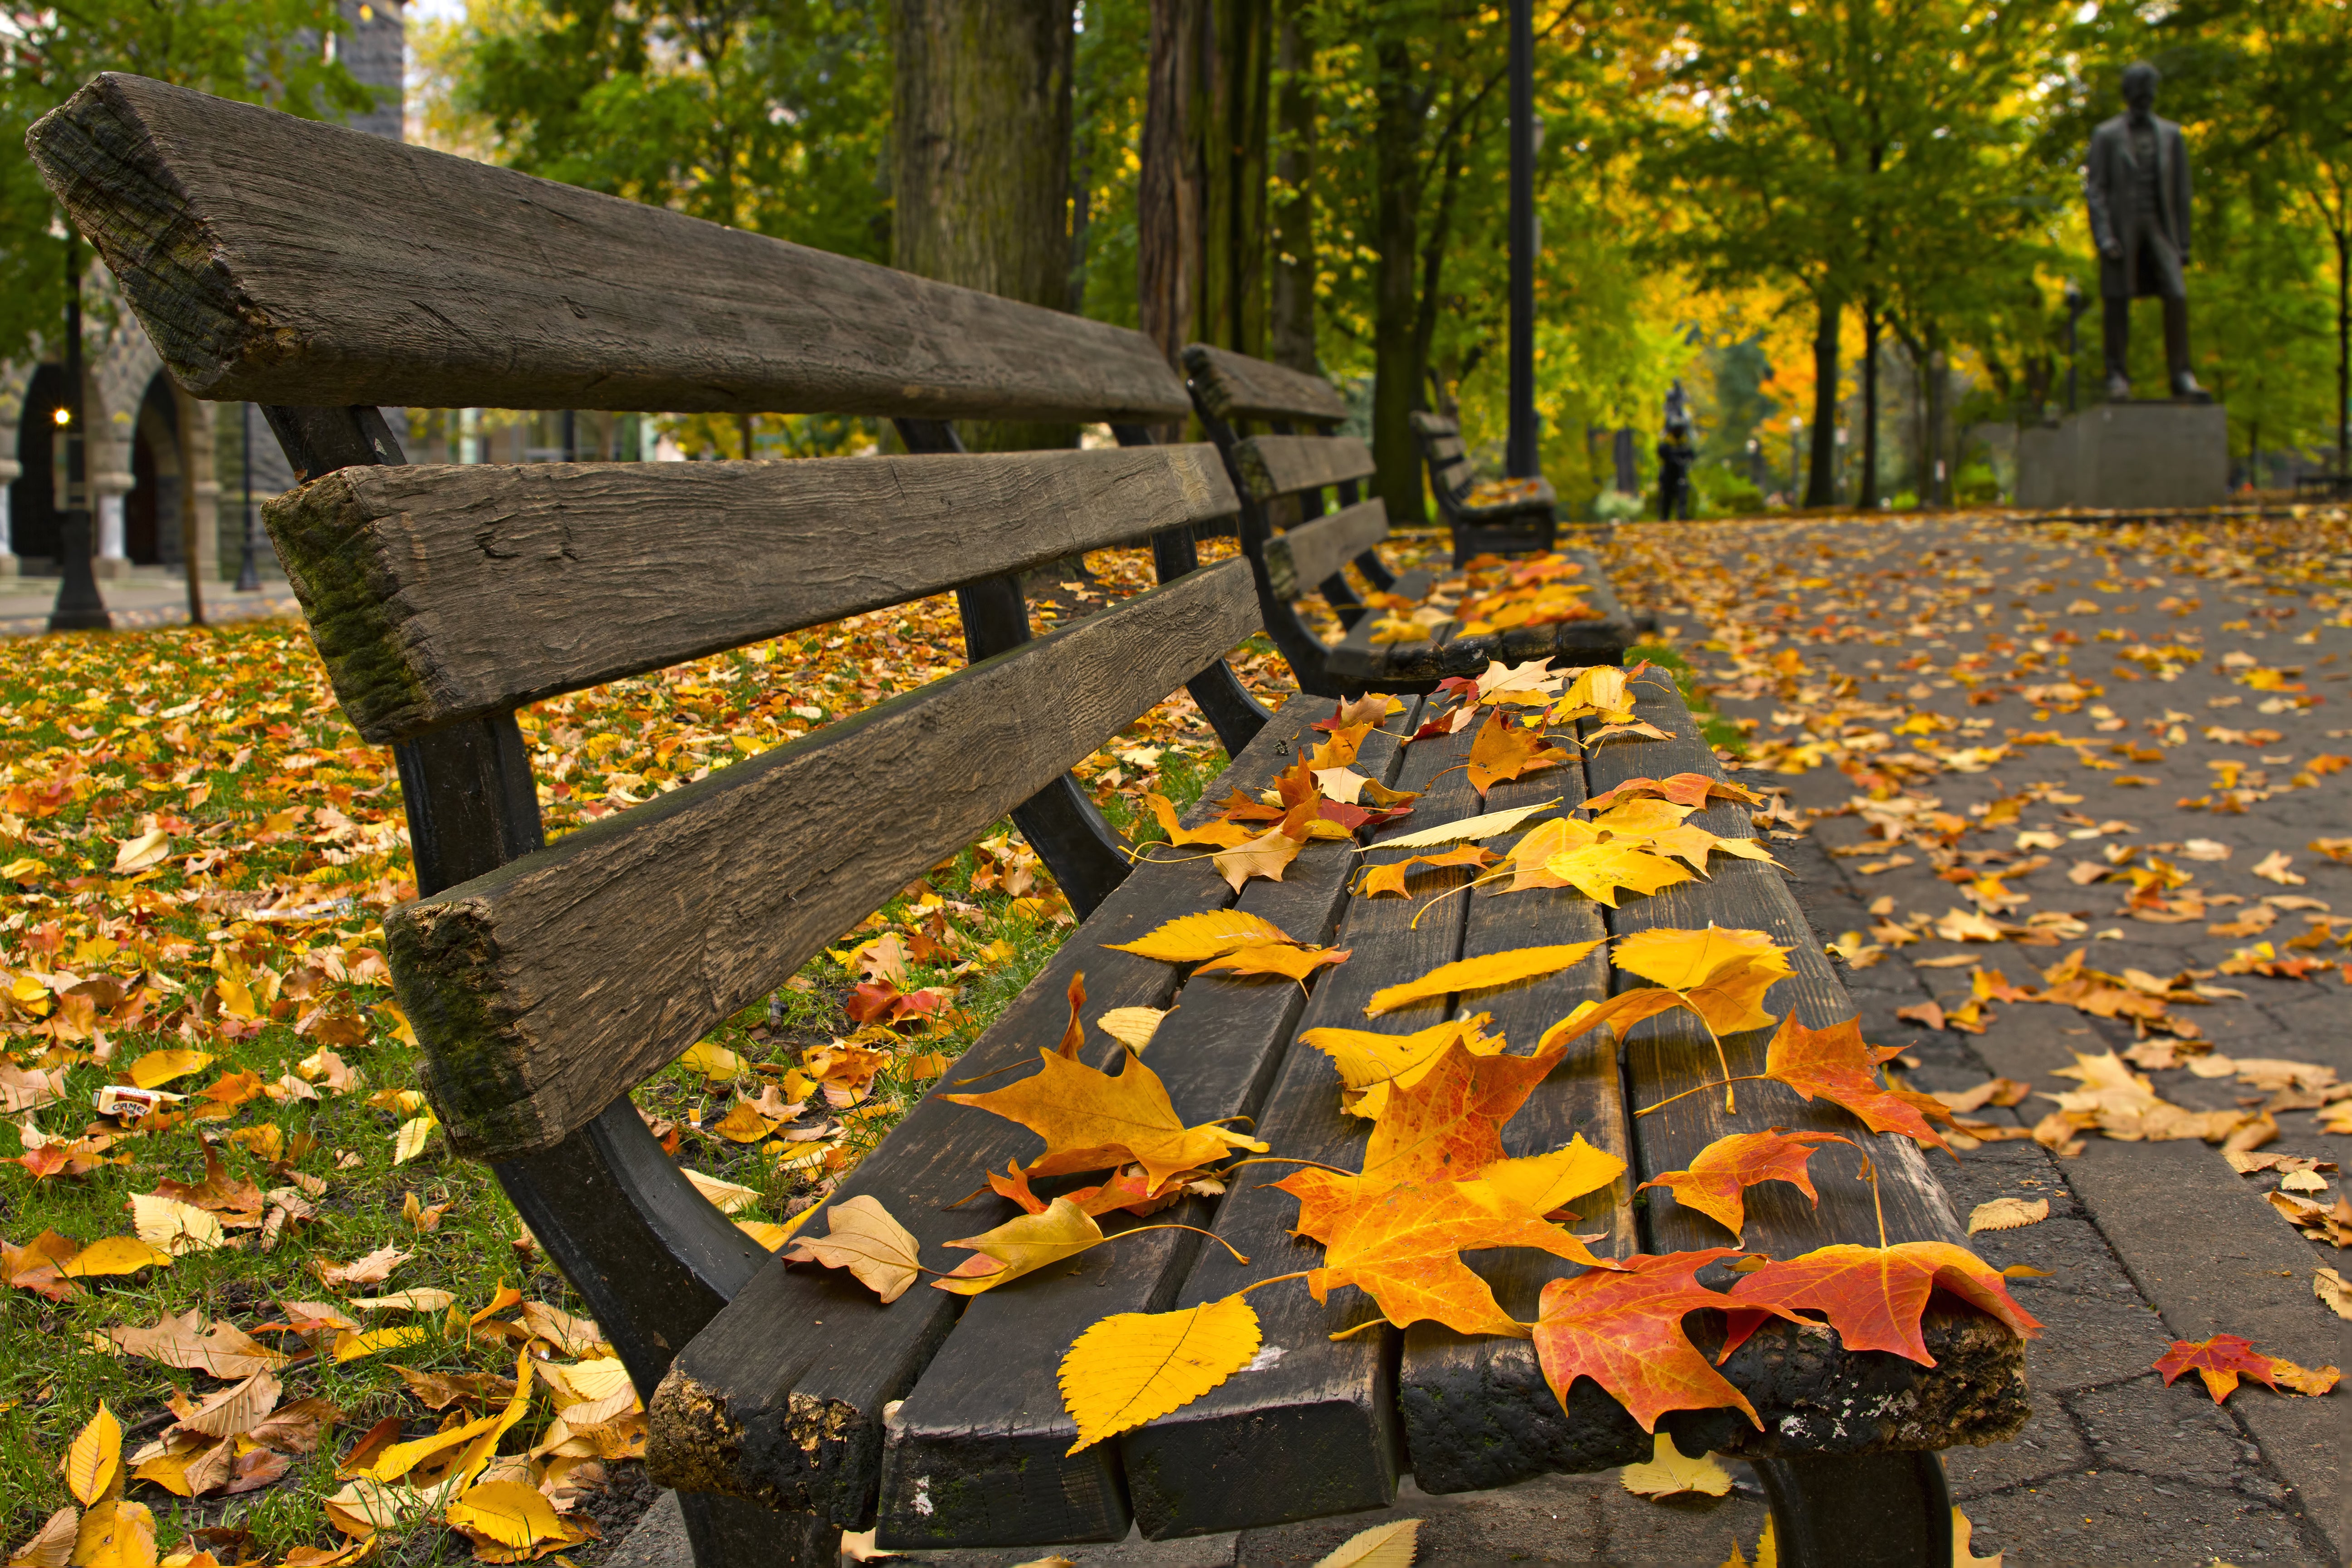 Autumn leaves on a park bench